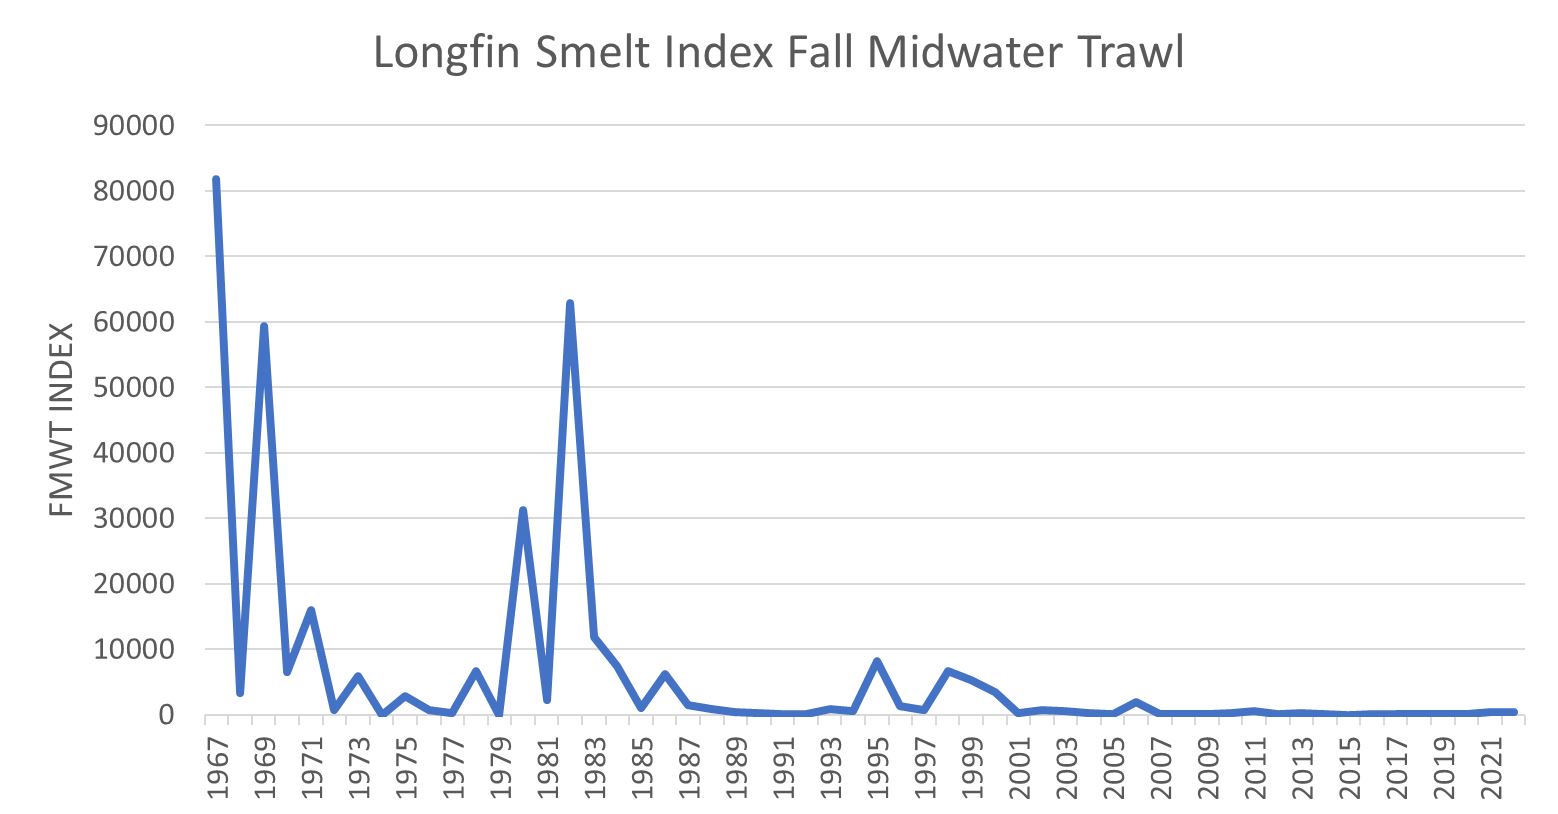 Figure 1. Bay-Delta fall-midwater-trawl longfin smelt catch index 1967-2022.